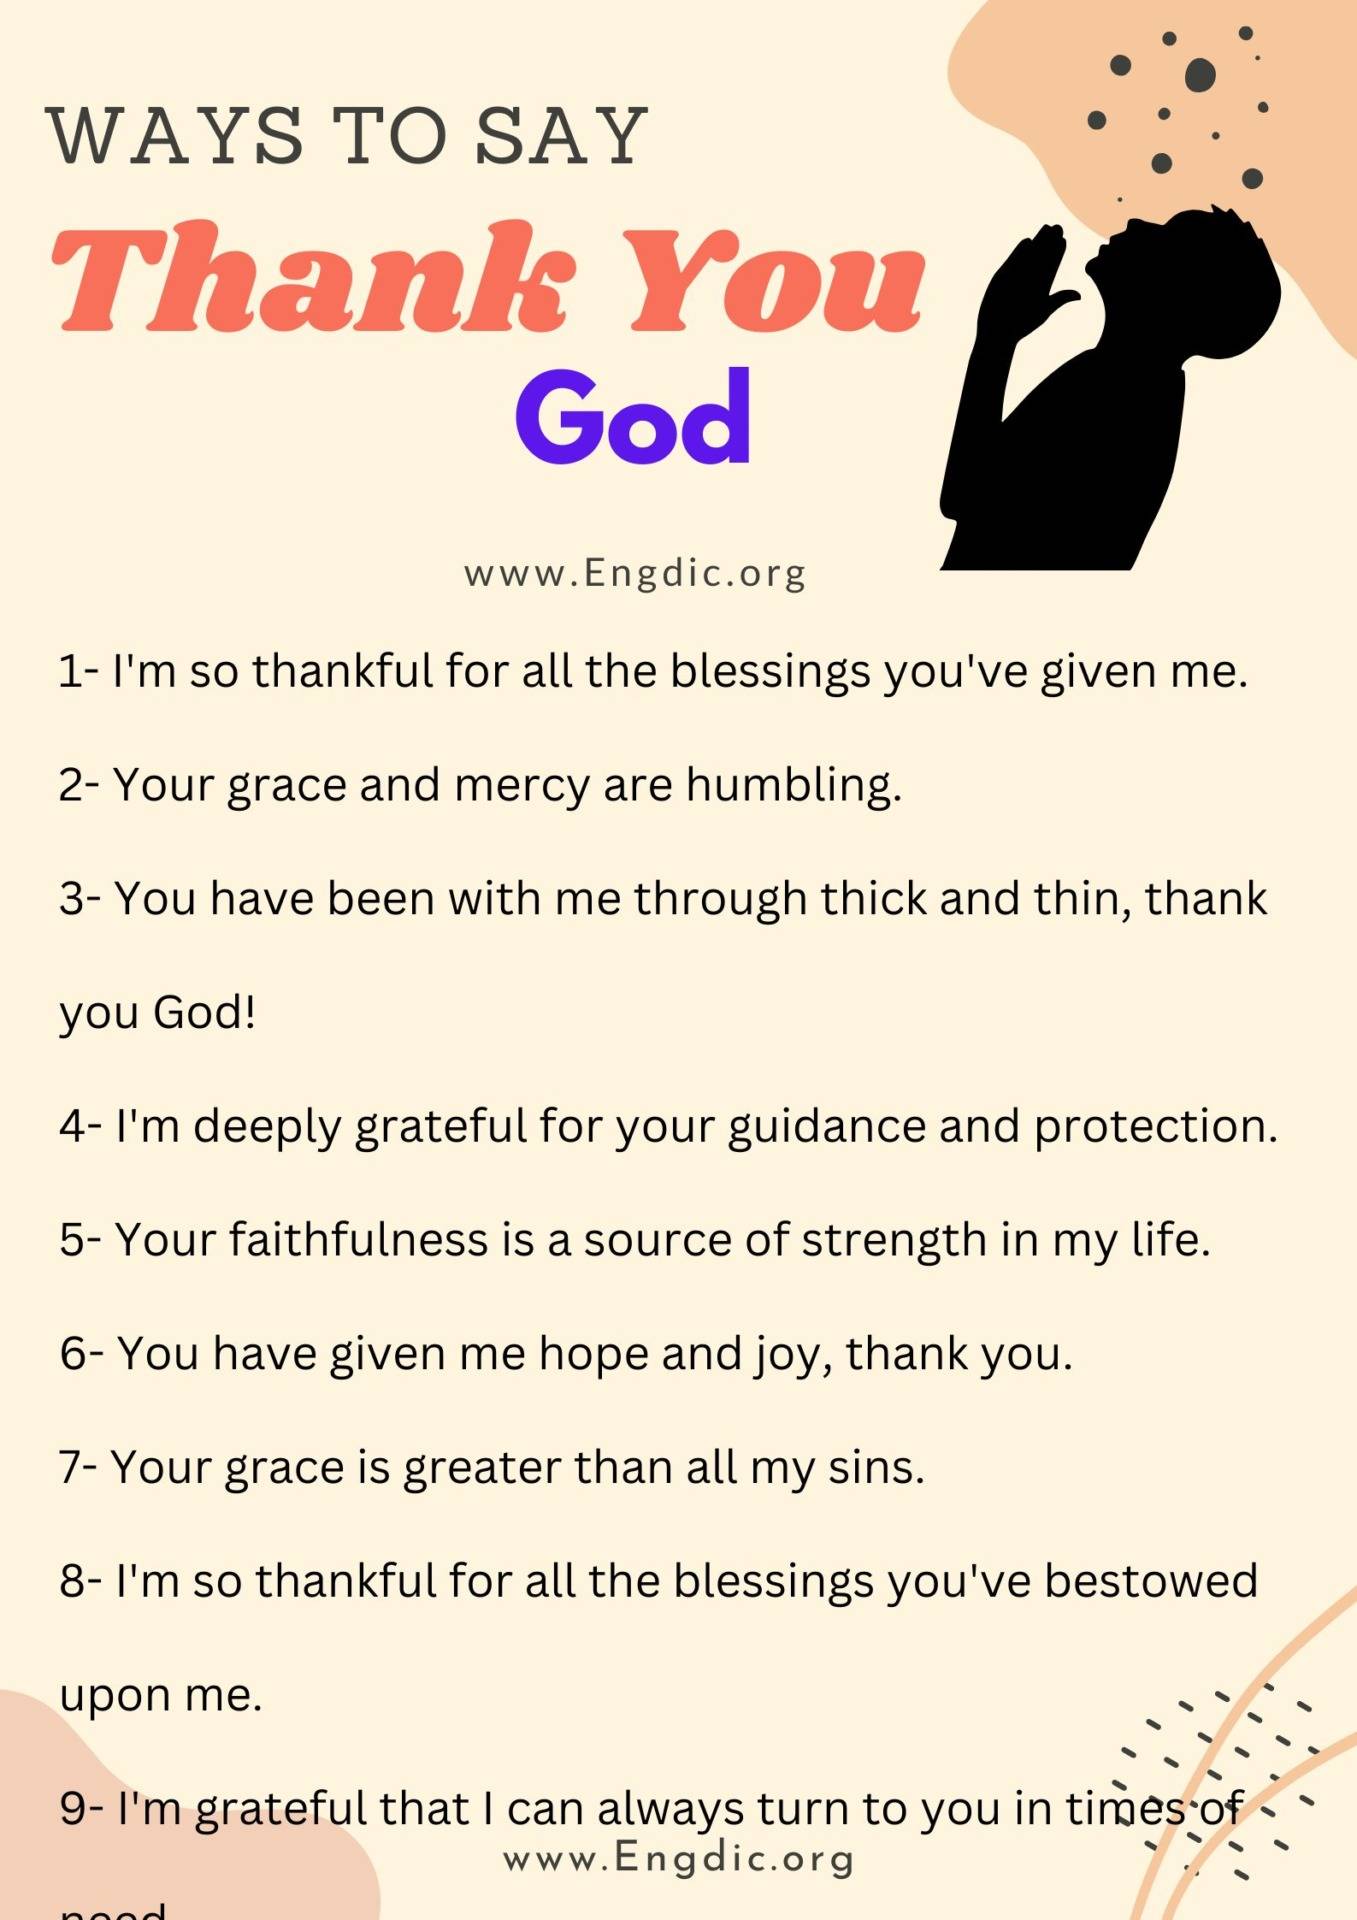 Ways to say thank you God